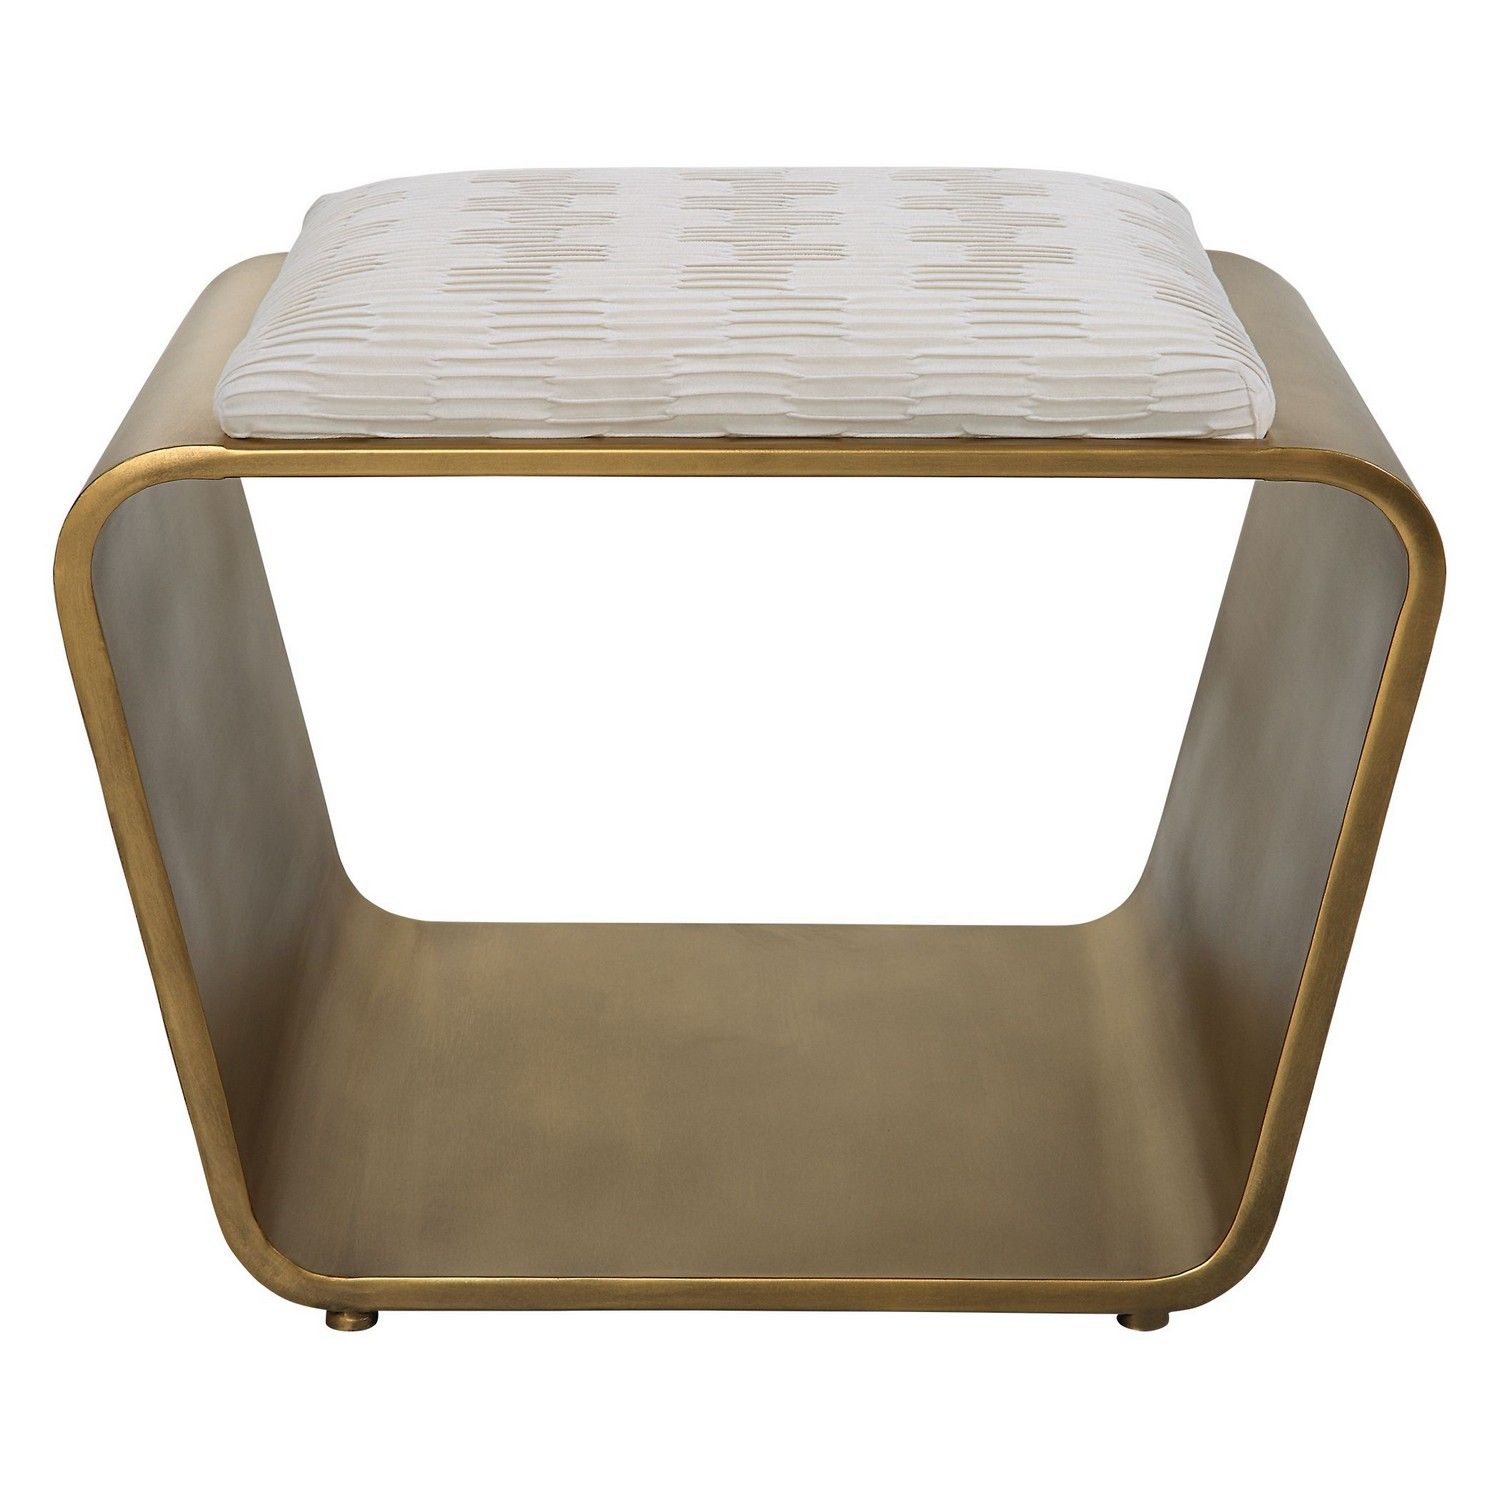 Uttermost Hoop Small Bench - Gold